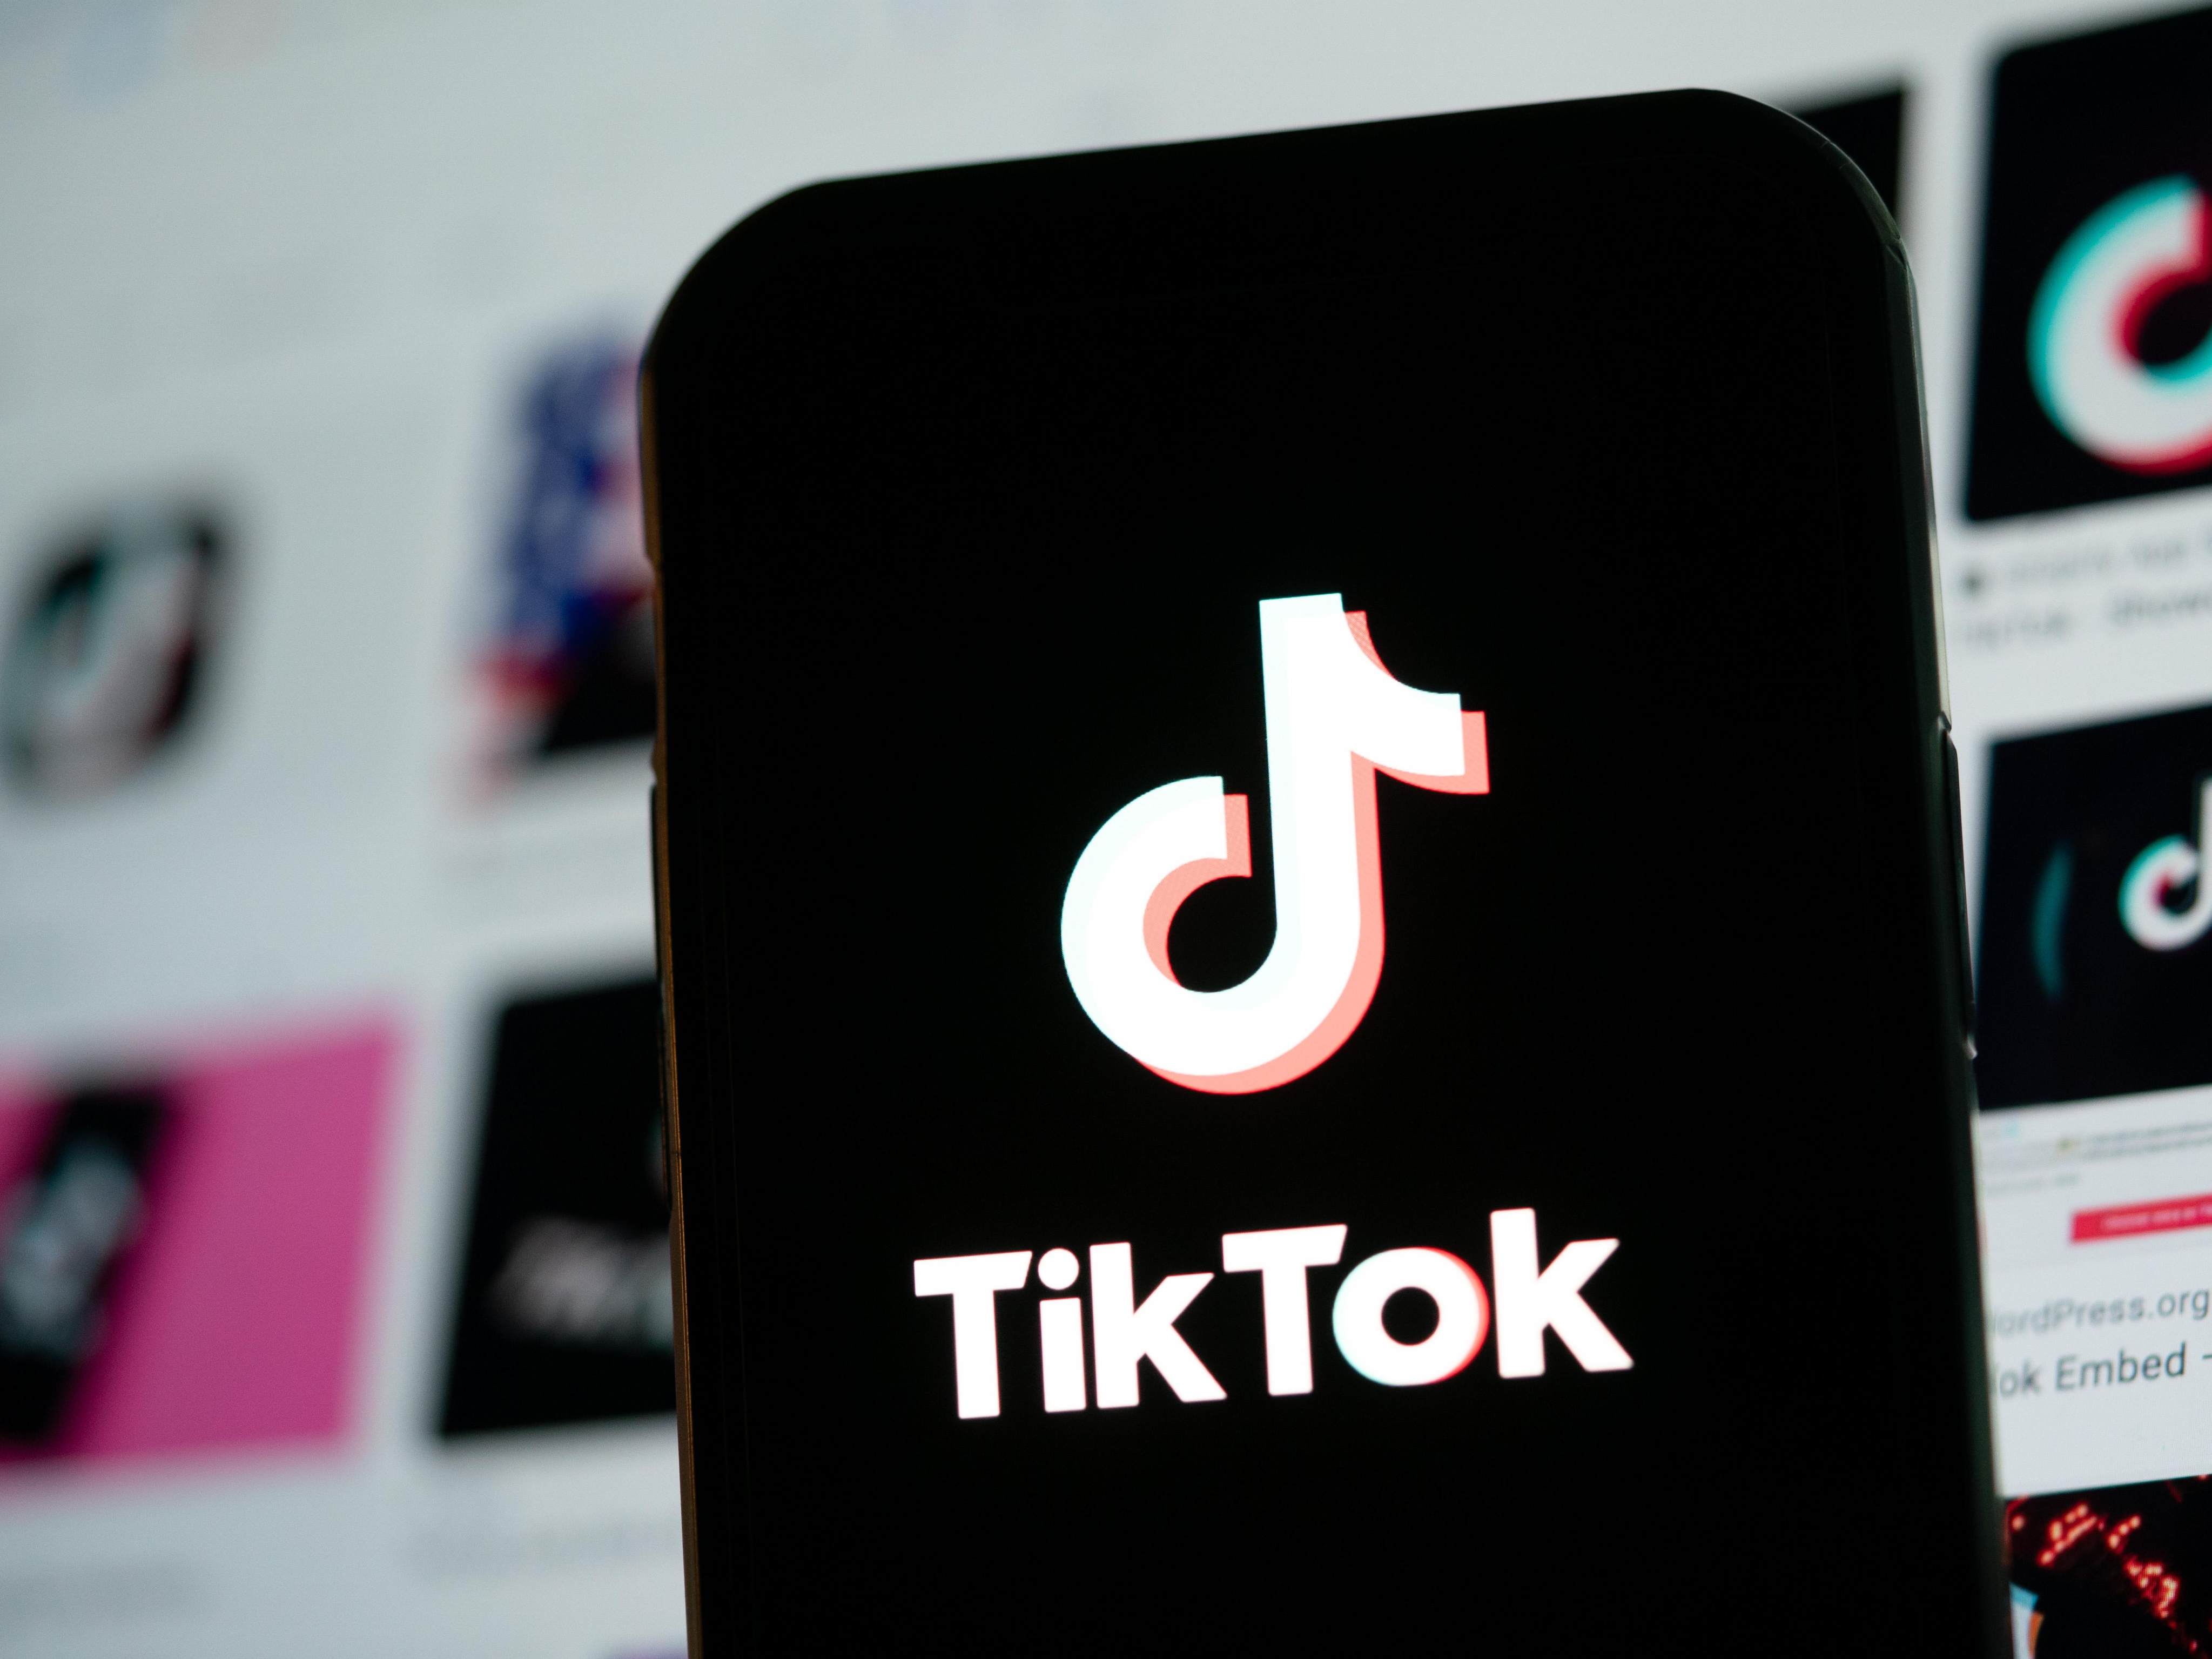 Chinese-owned social media app TikTok is facing trouble in the US as lawmakers move to either ban the app or force Bytedance to sell it, over security concerns. Photo: Xinhua